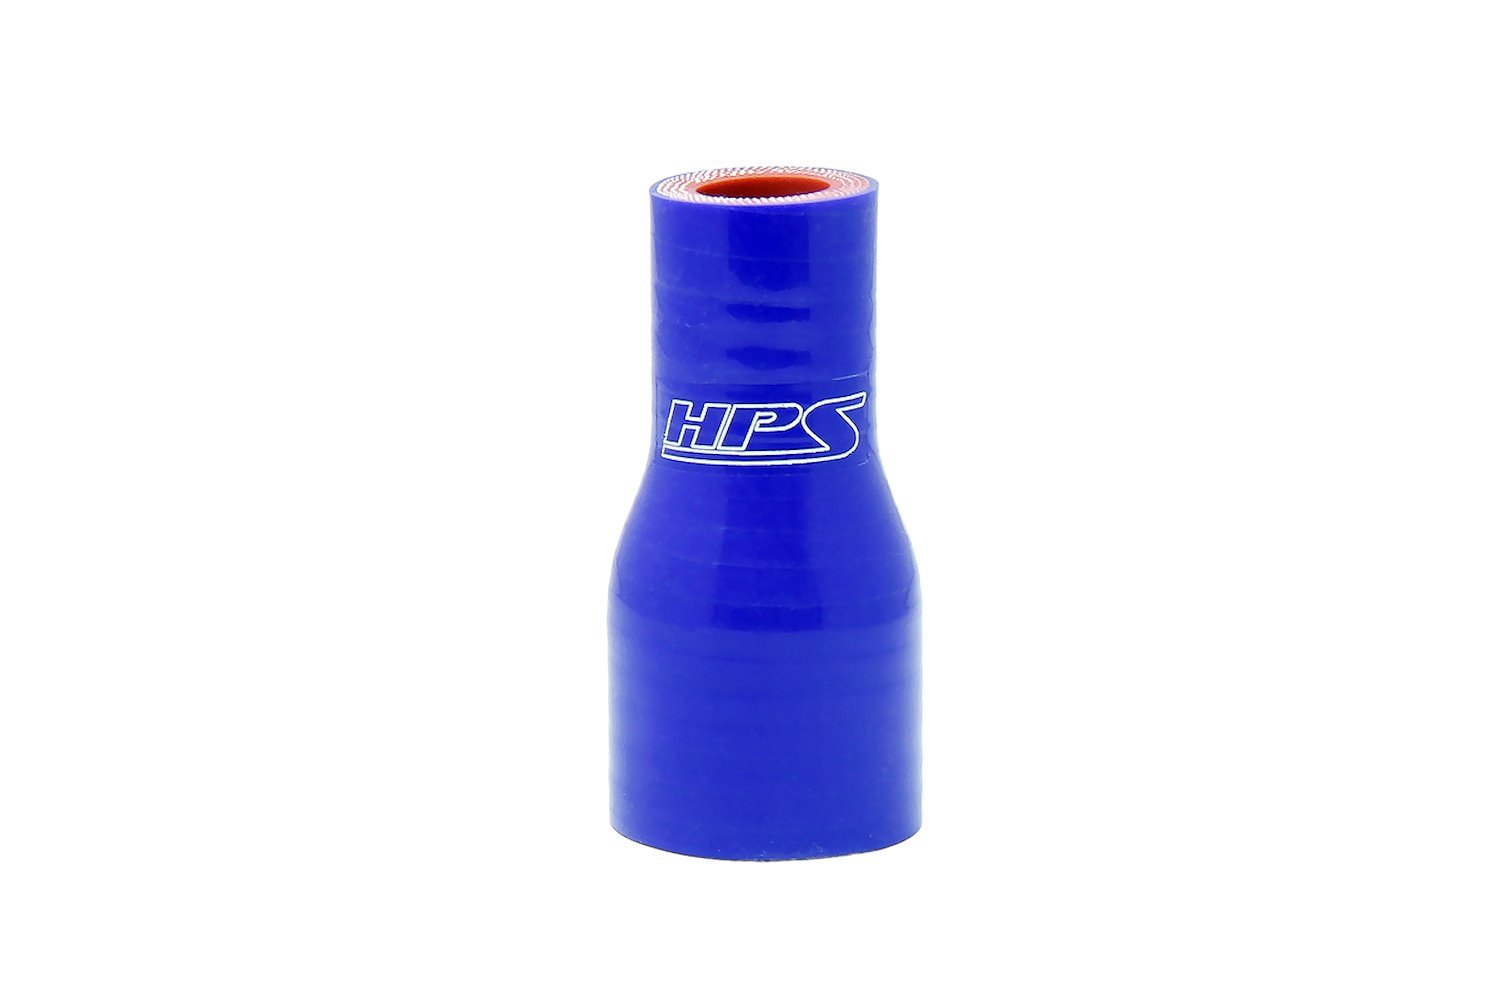 HTSR-100-125-BLUE Silicone Reducer Hose, High-Temp 4-Ply Reinforced, 1 in. - 1-1/4 in. ID, 3 in. Long, Blue